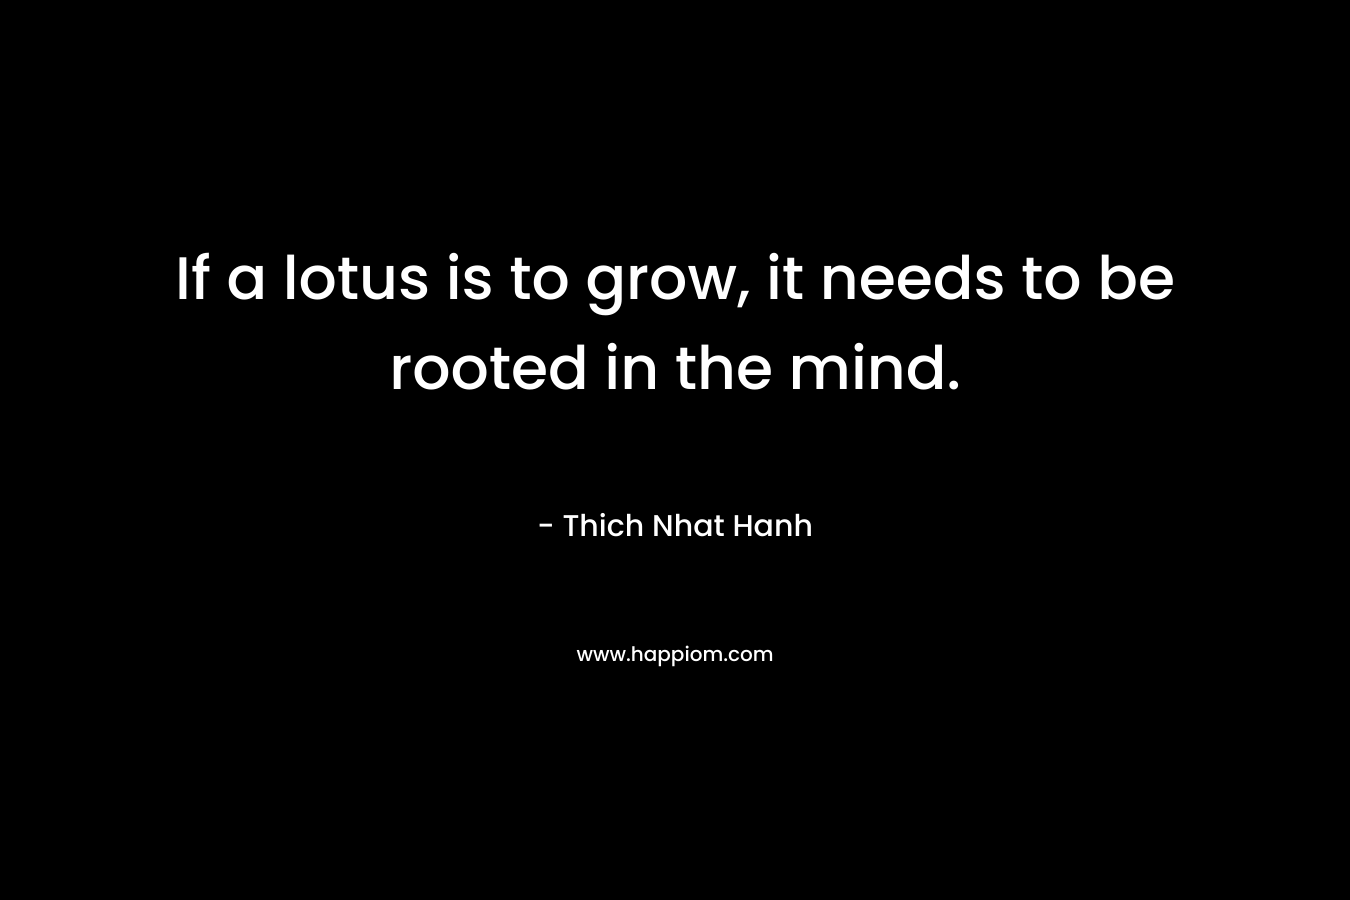 If a lotus is to grow, it needs to be rooted in the mind.